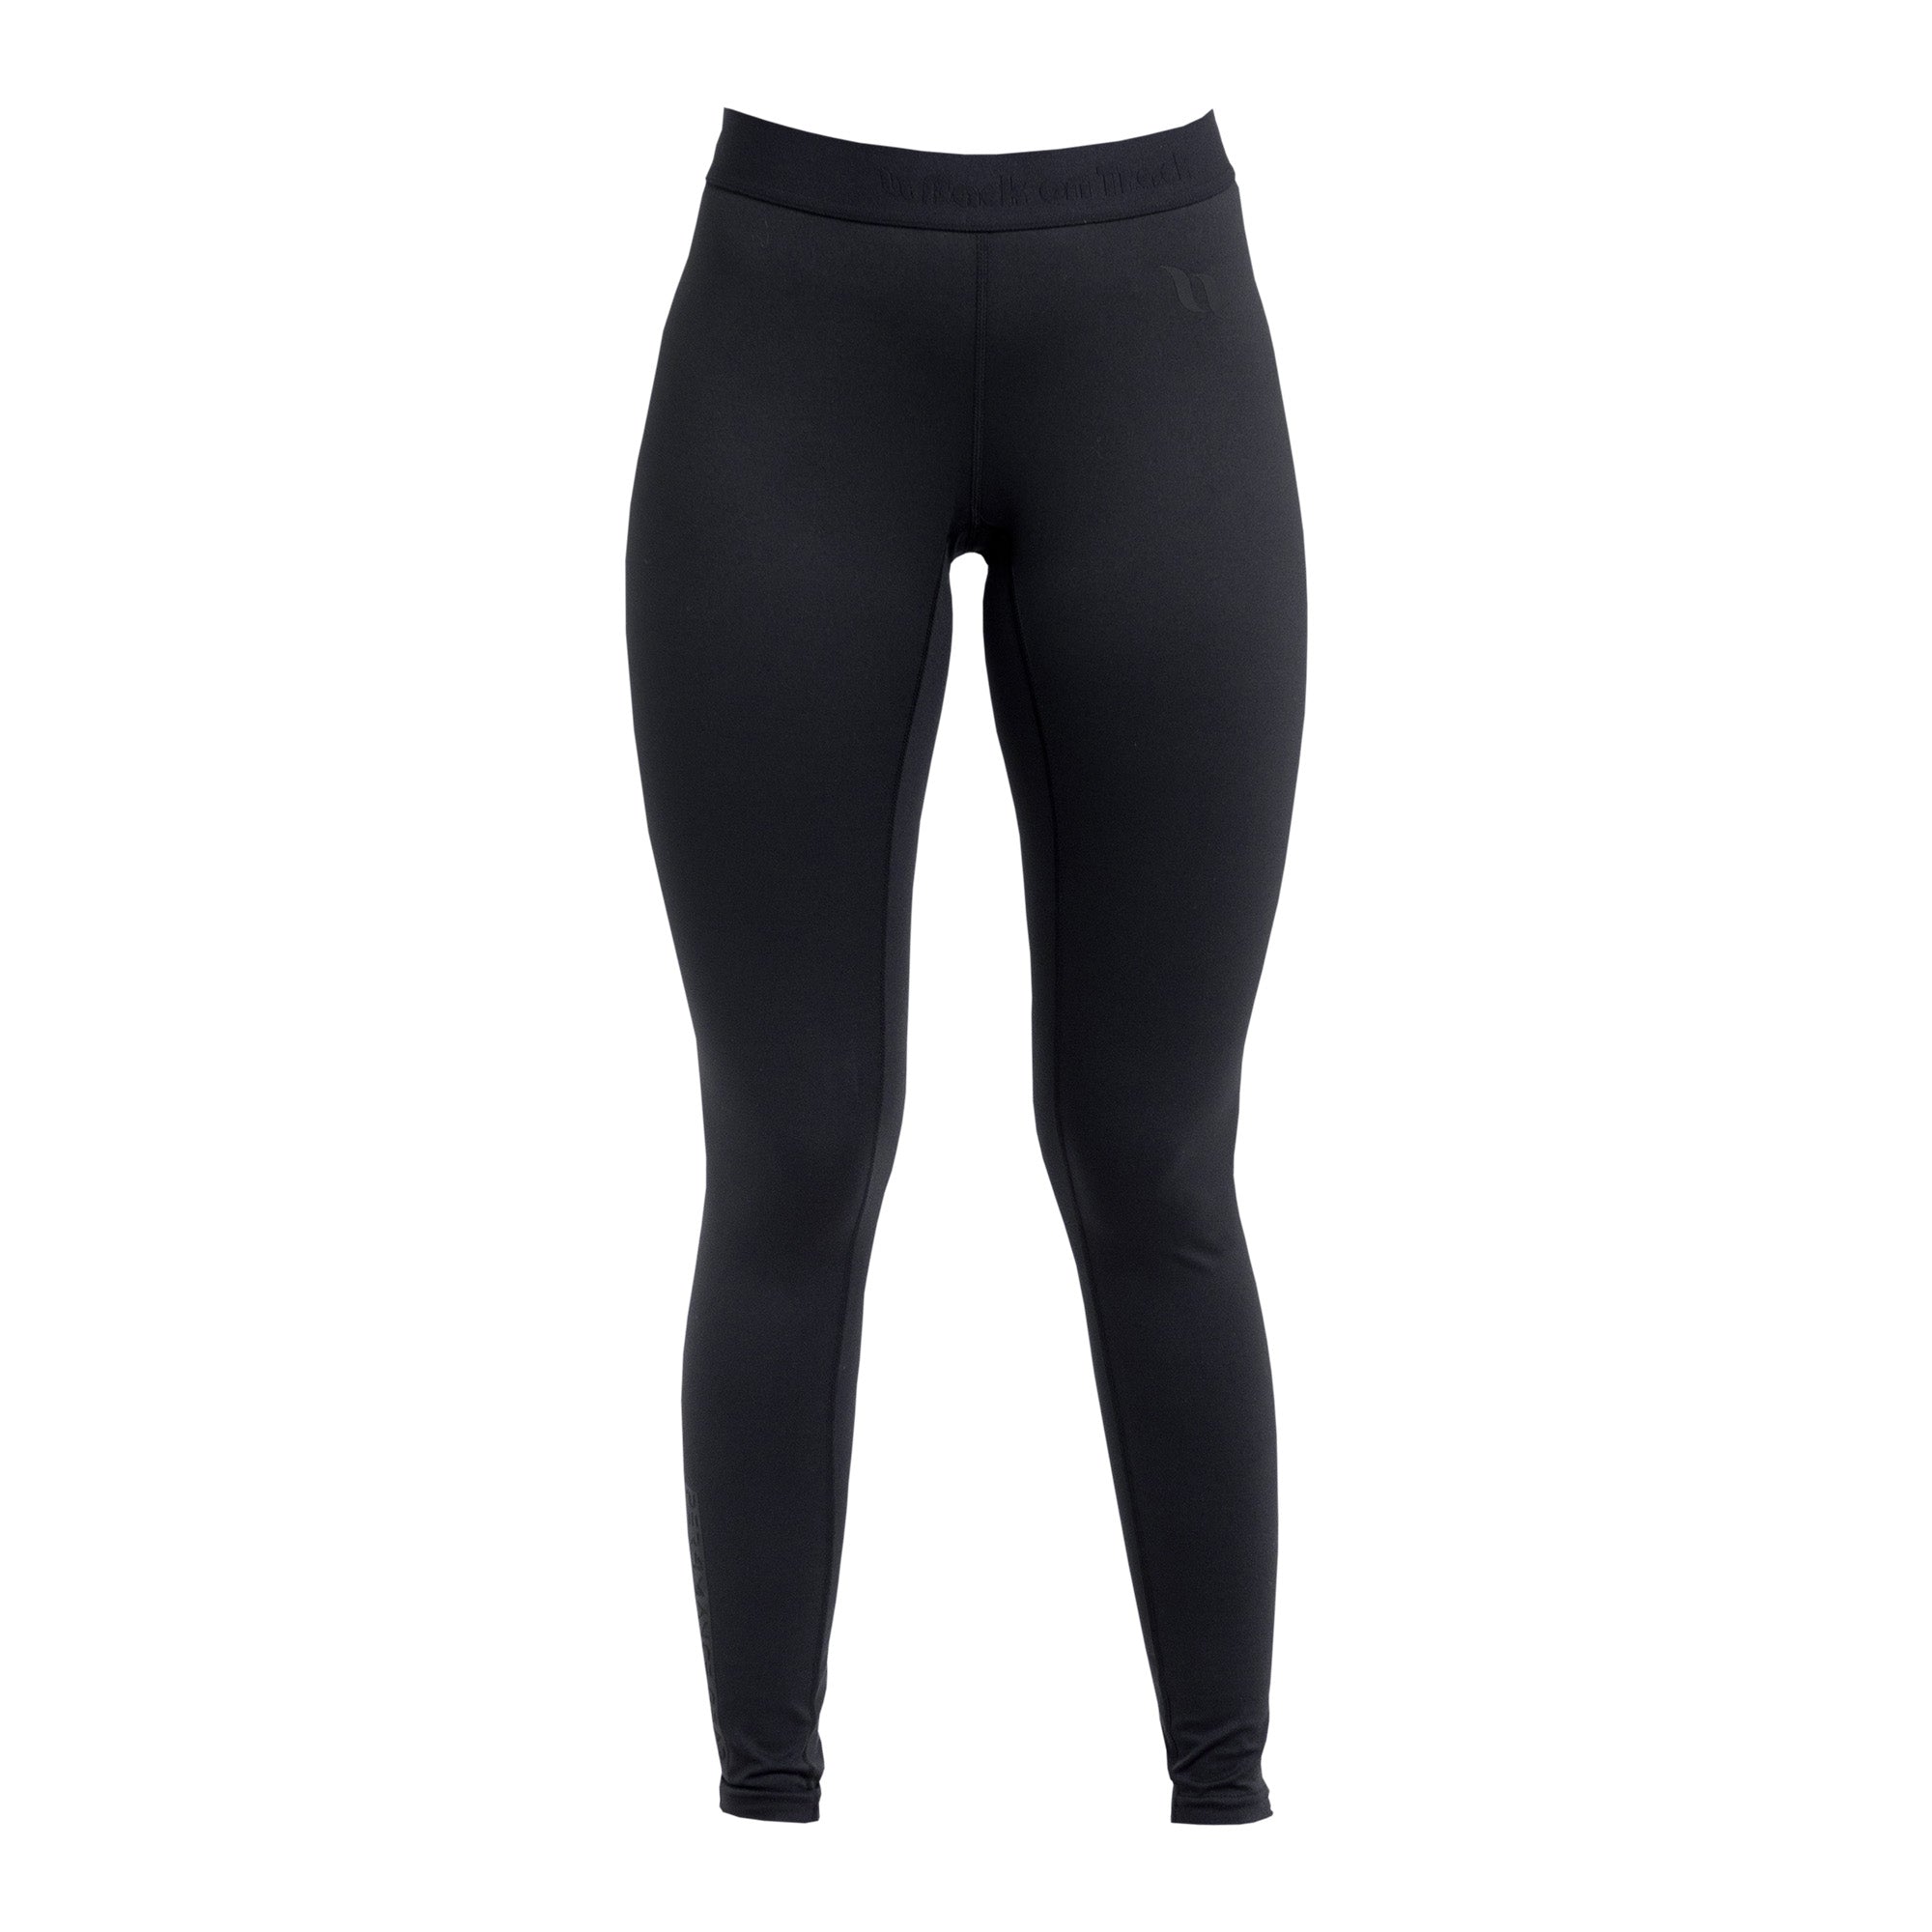 Cate P4G Women's Tights